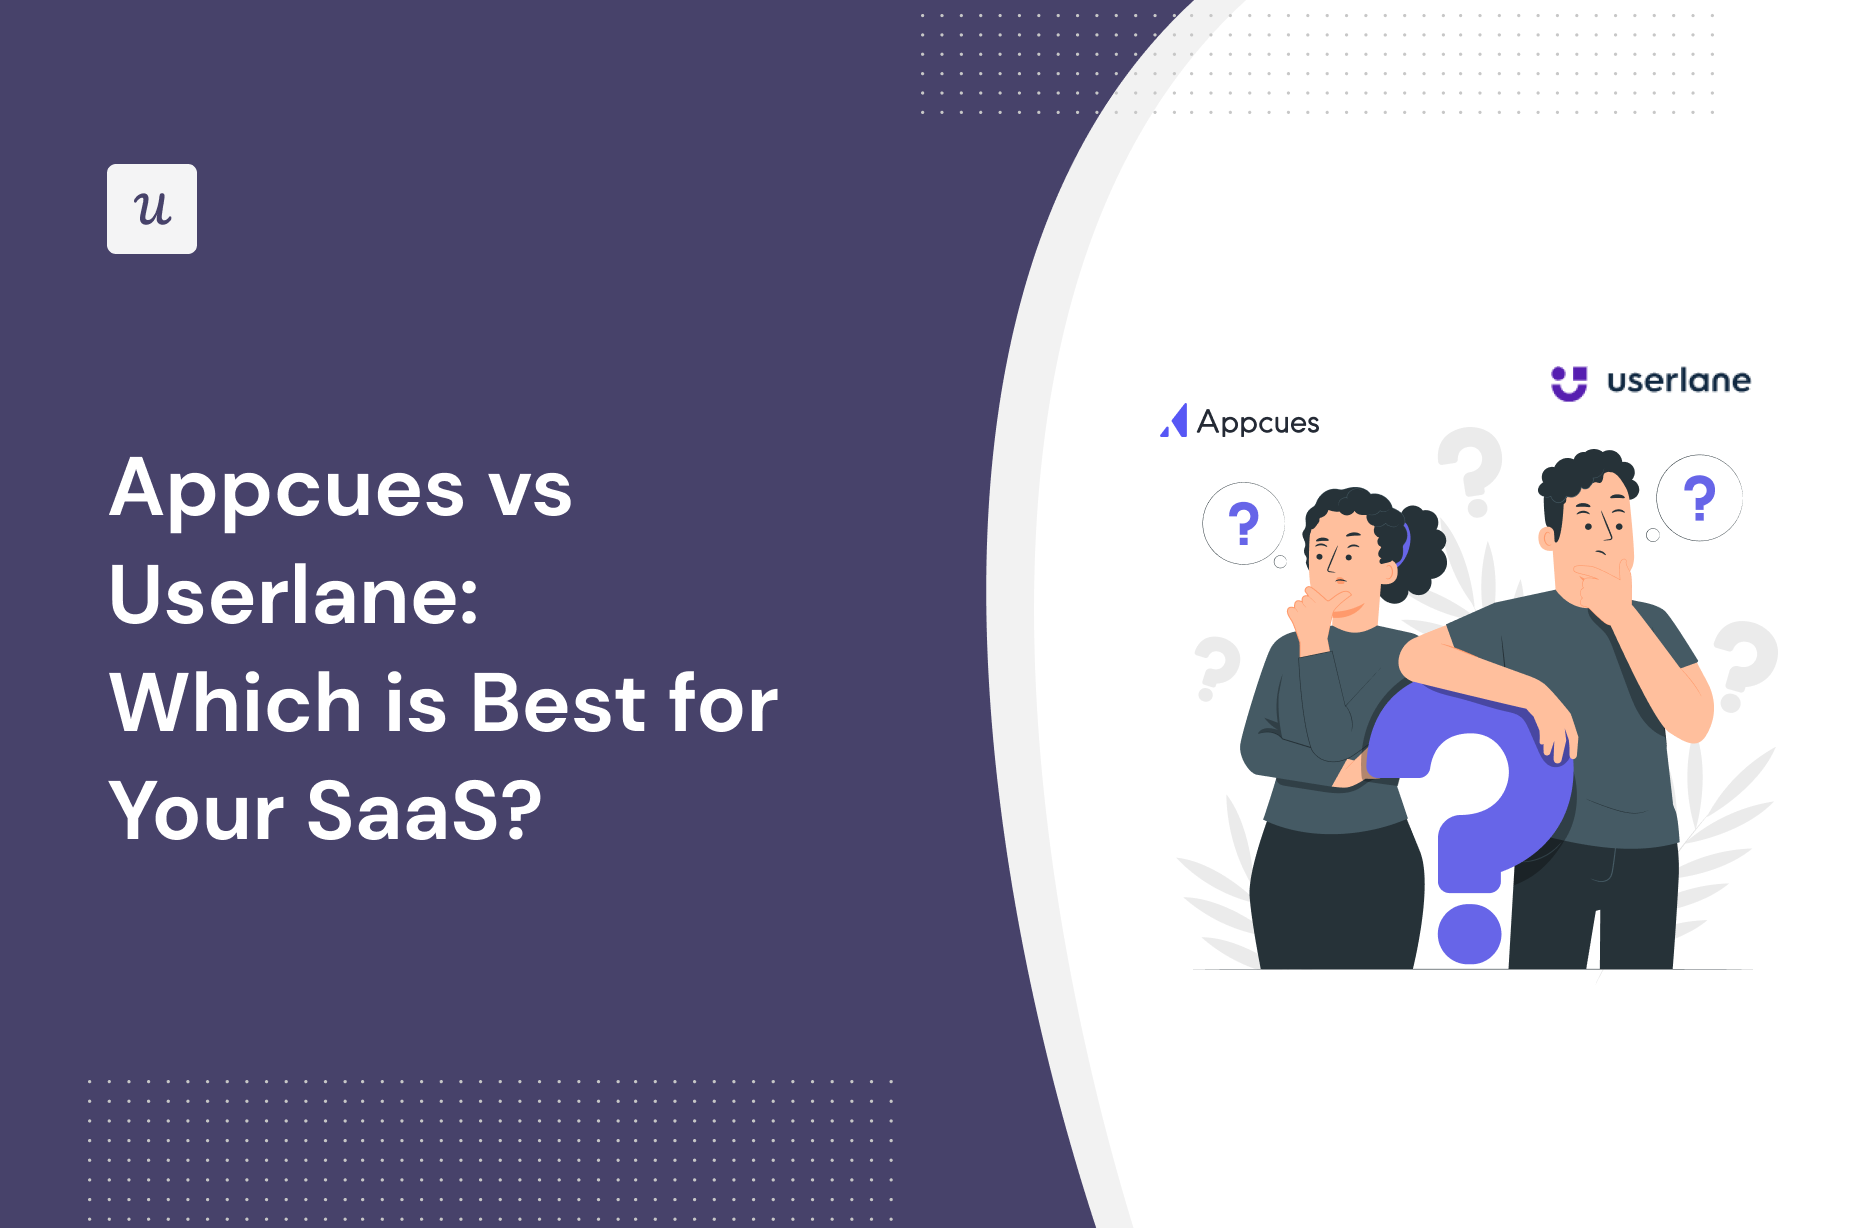 Appcues vs Userlane: Which is Best for Your SaaS?